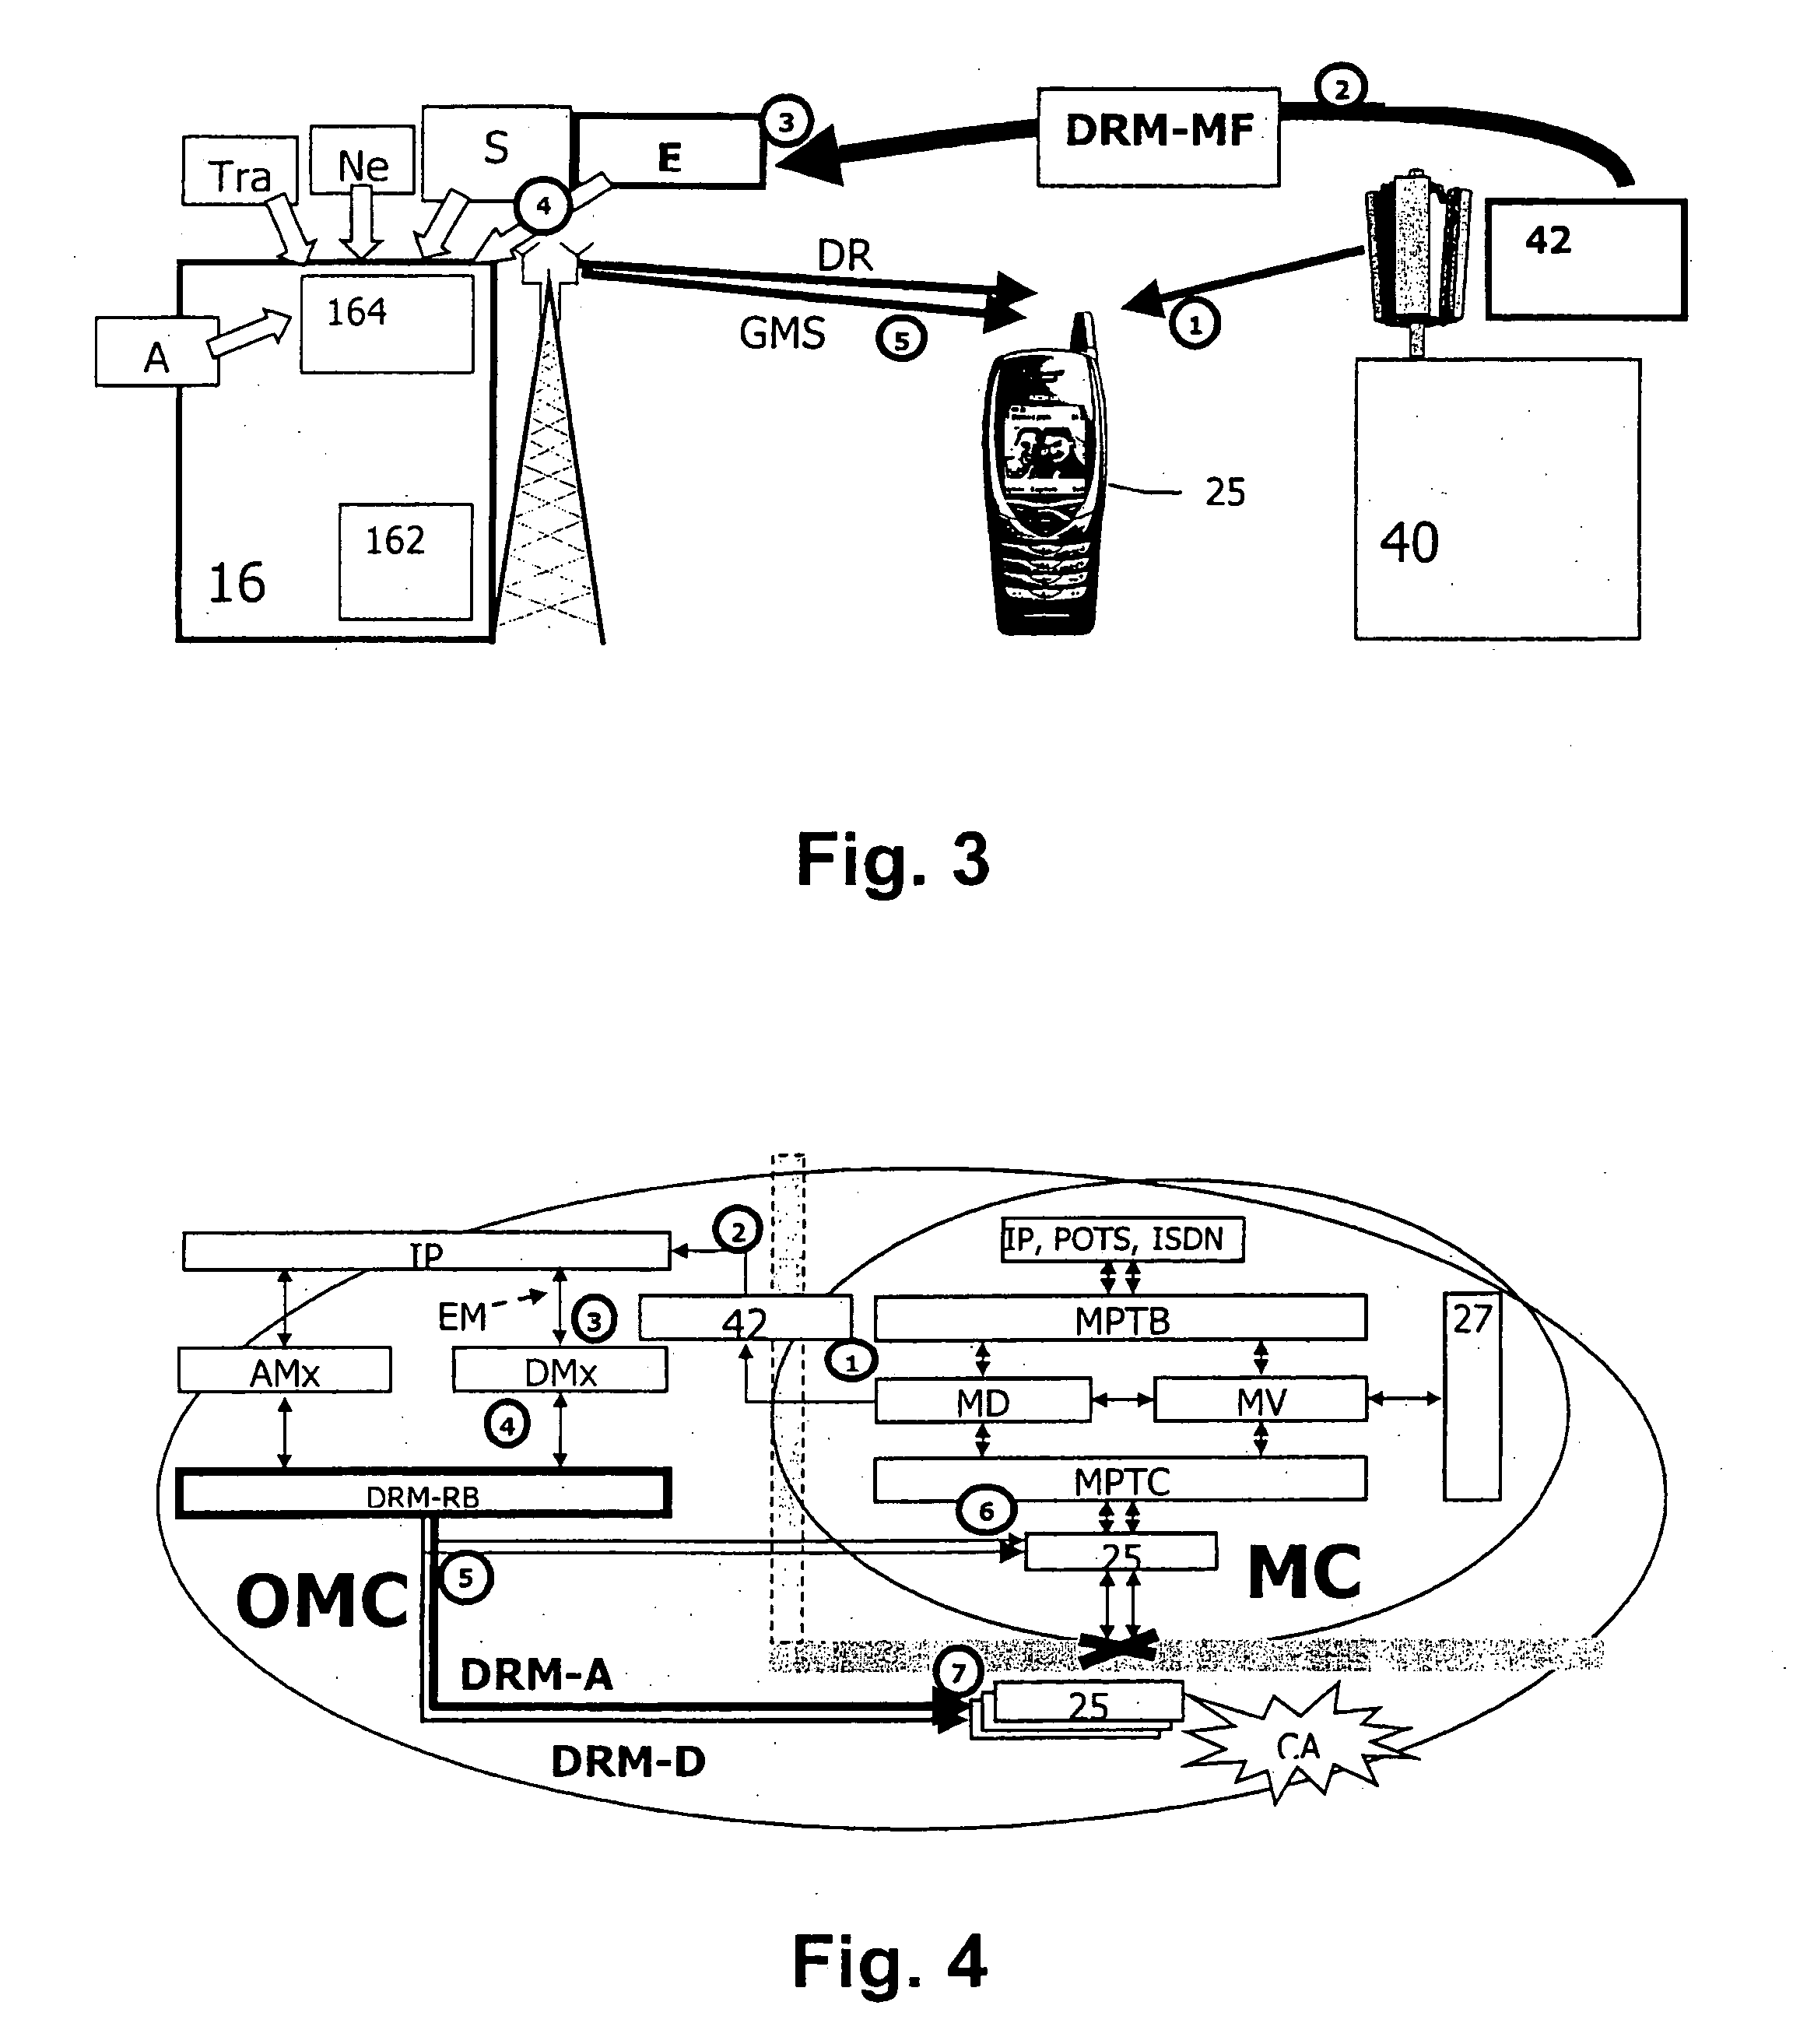 Data transport to mobile devices using a radio broadcast data channel